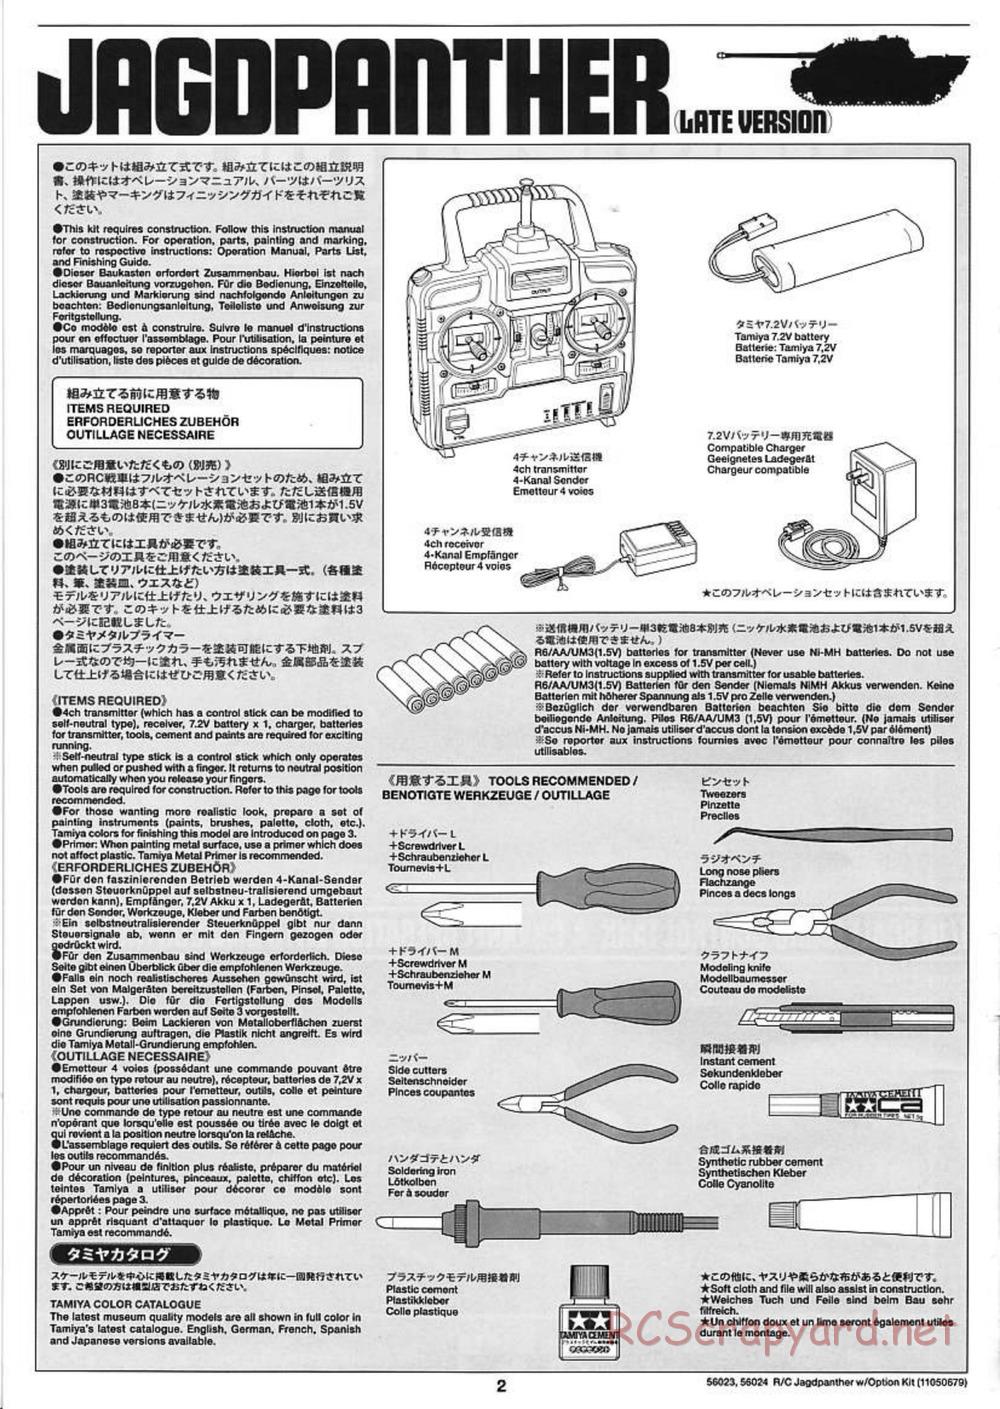 Tamiya - Jagdpanther - 1/16 Scale Chassis - Manual - Page 2